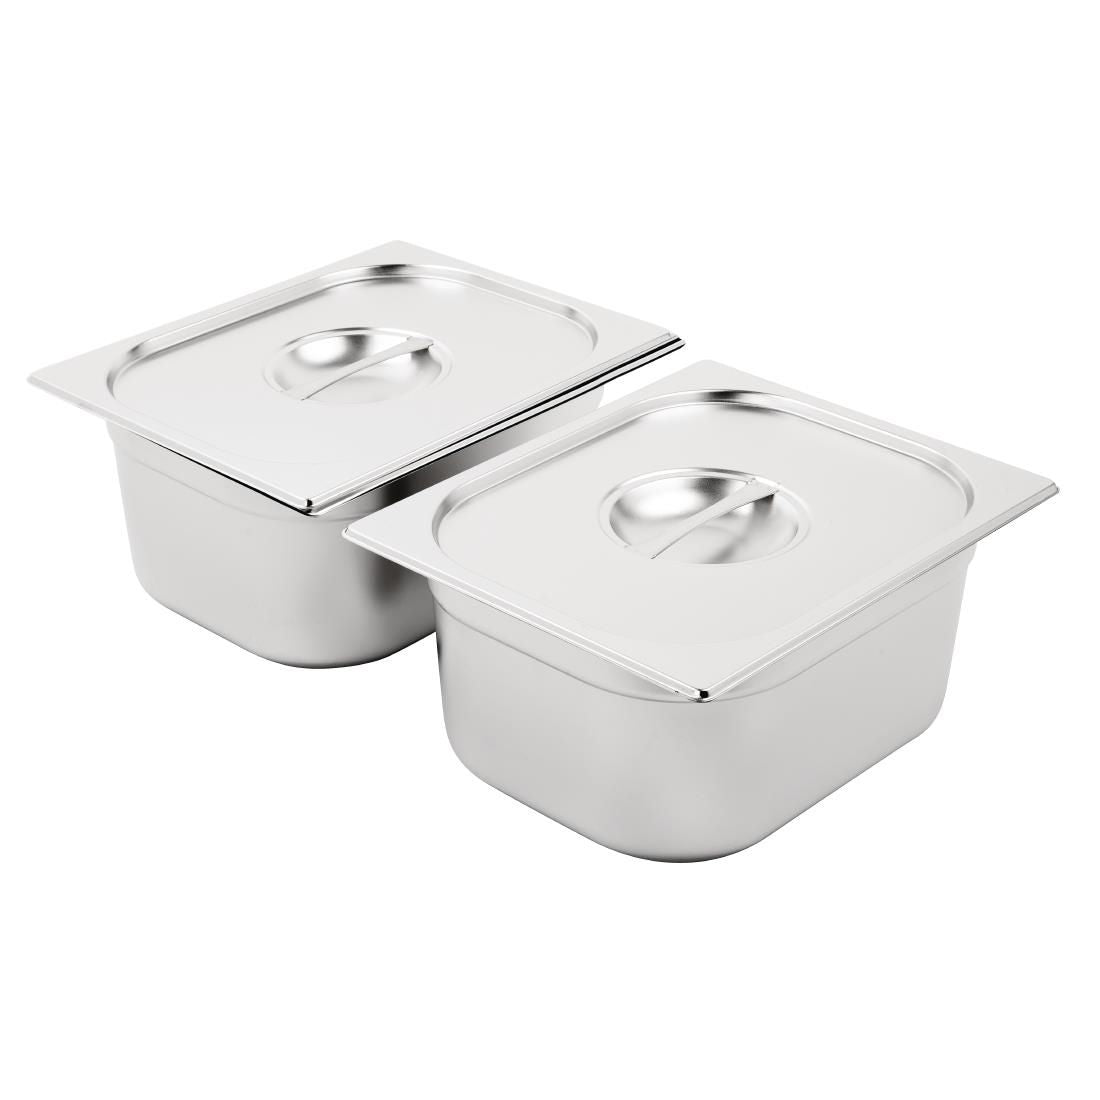 SA245 Vogue Stainless Steel Gastronorm Pan Set 2 x 1/2 with Lids